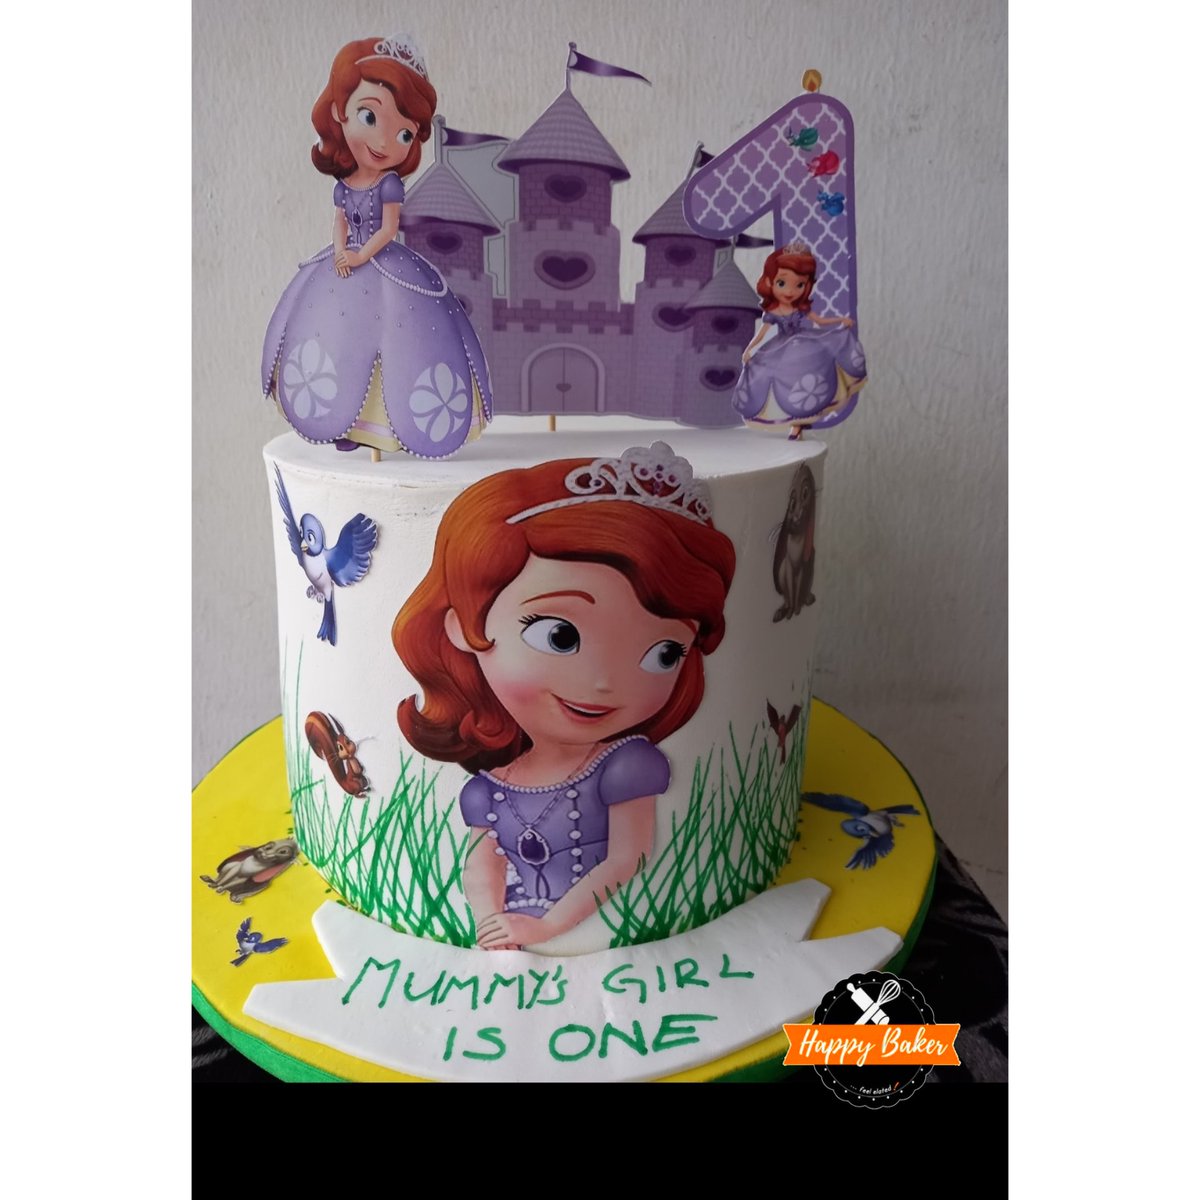 Cakes that give joy to your kids.
Please RT 🙏

#cakedesigner